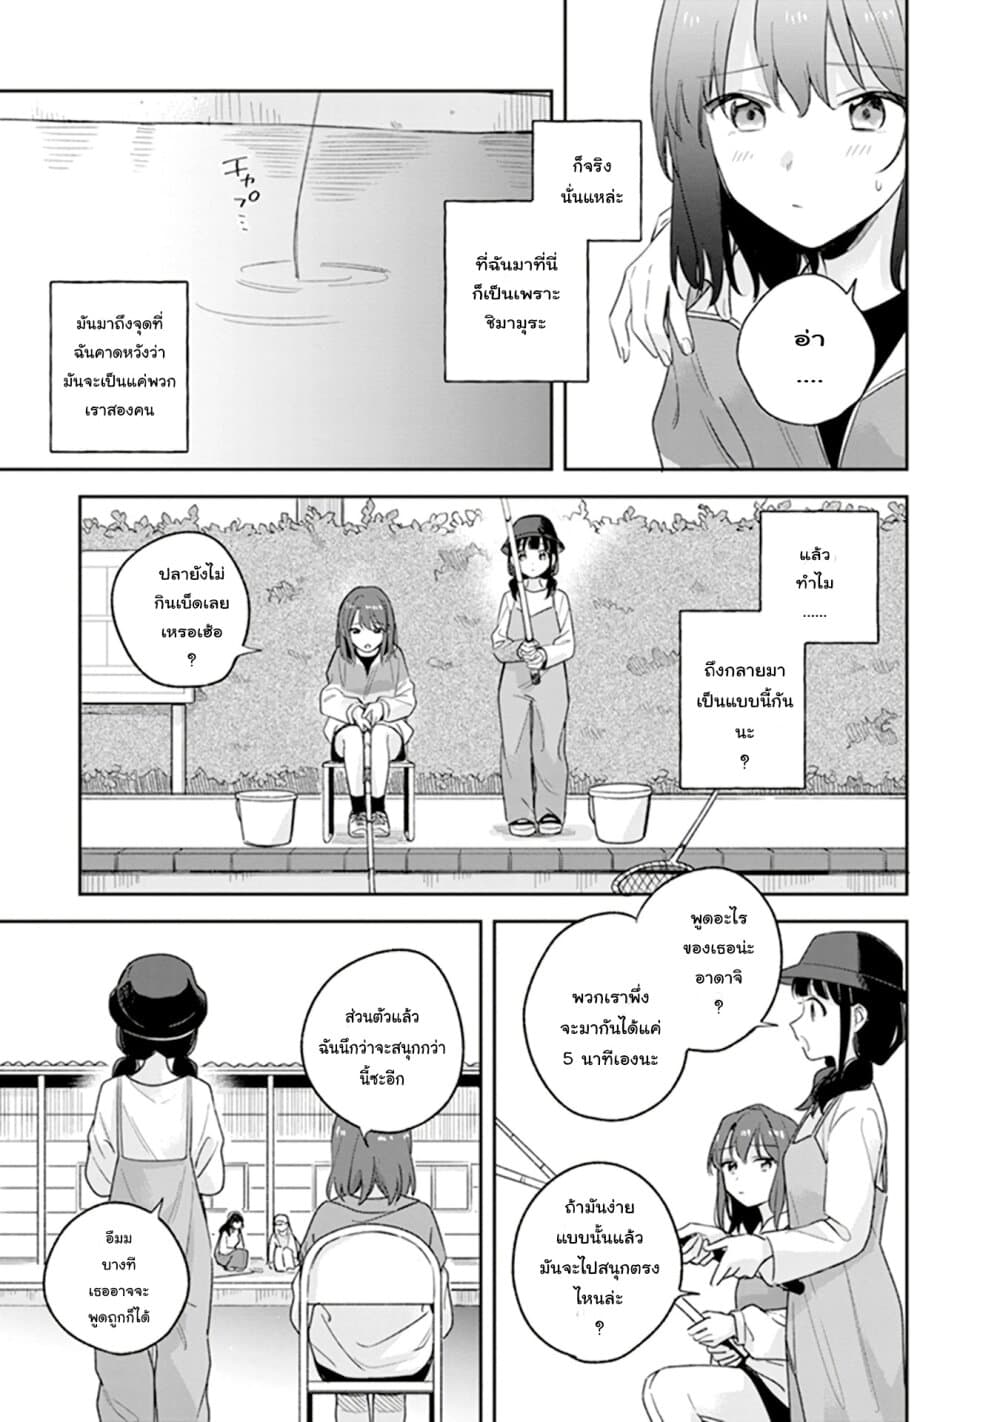 Adachi-to-Shimamura-Official-Comic-Anthology-Chapter1-7.jpg